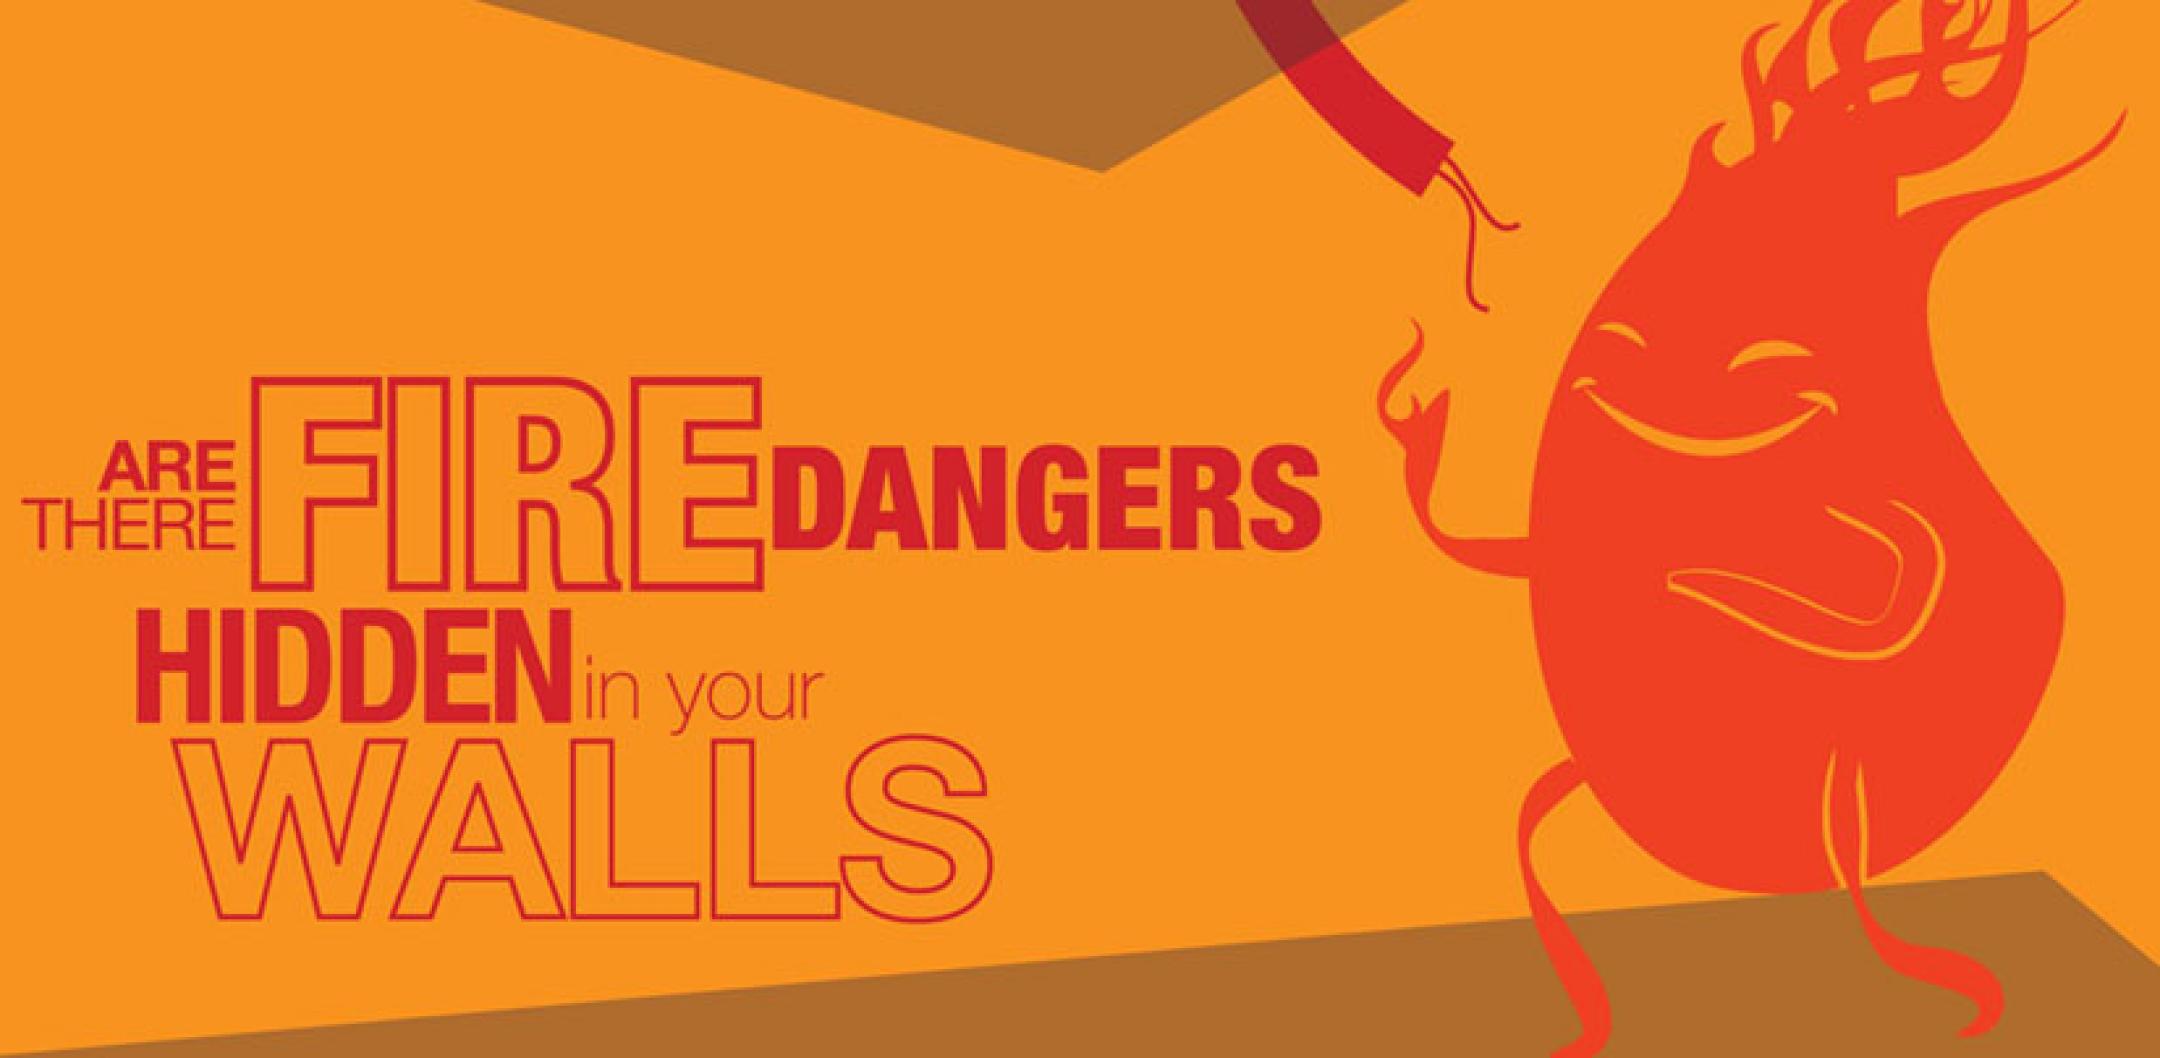 Are There Fire Dangers Hidden in Your Walls?